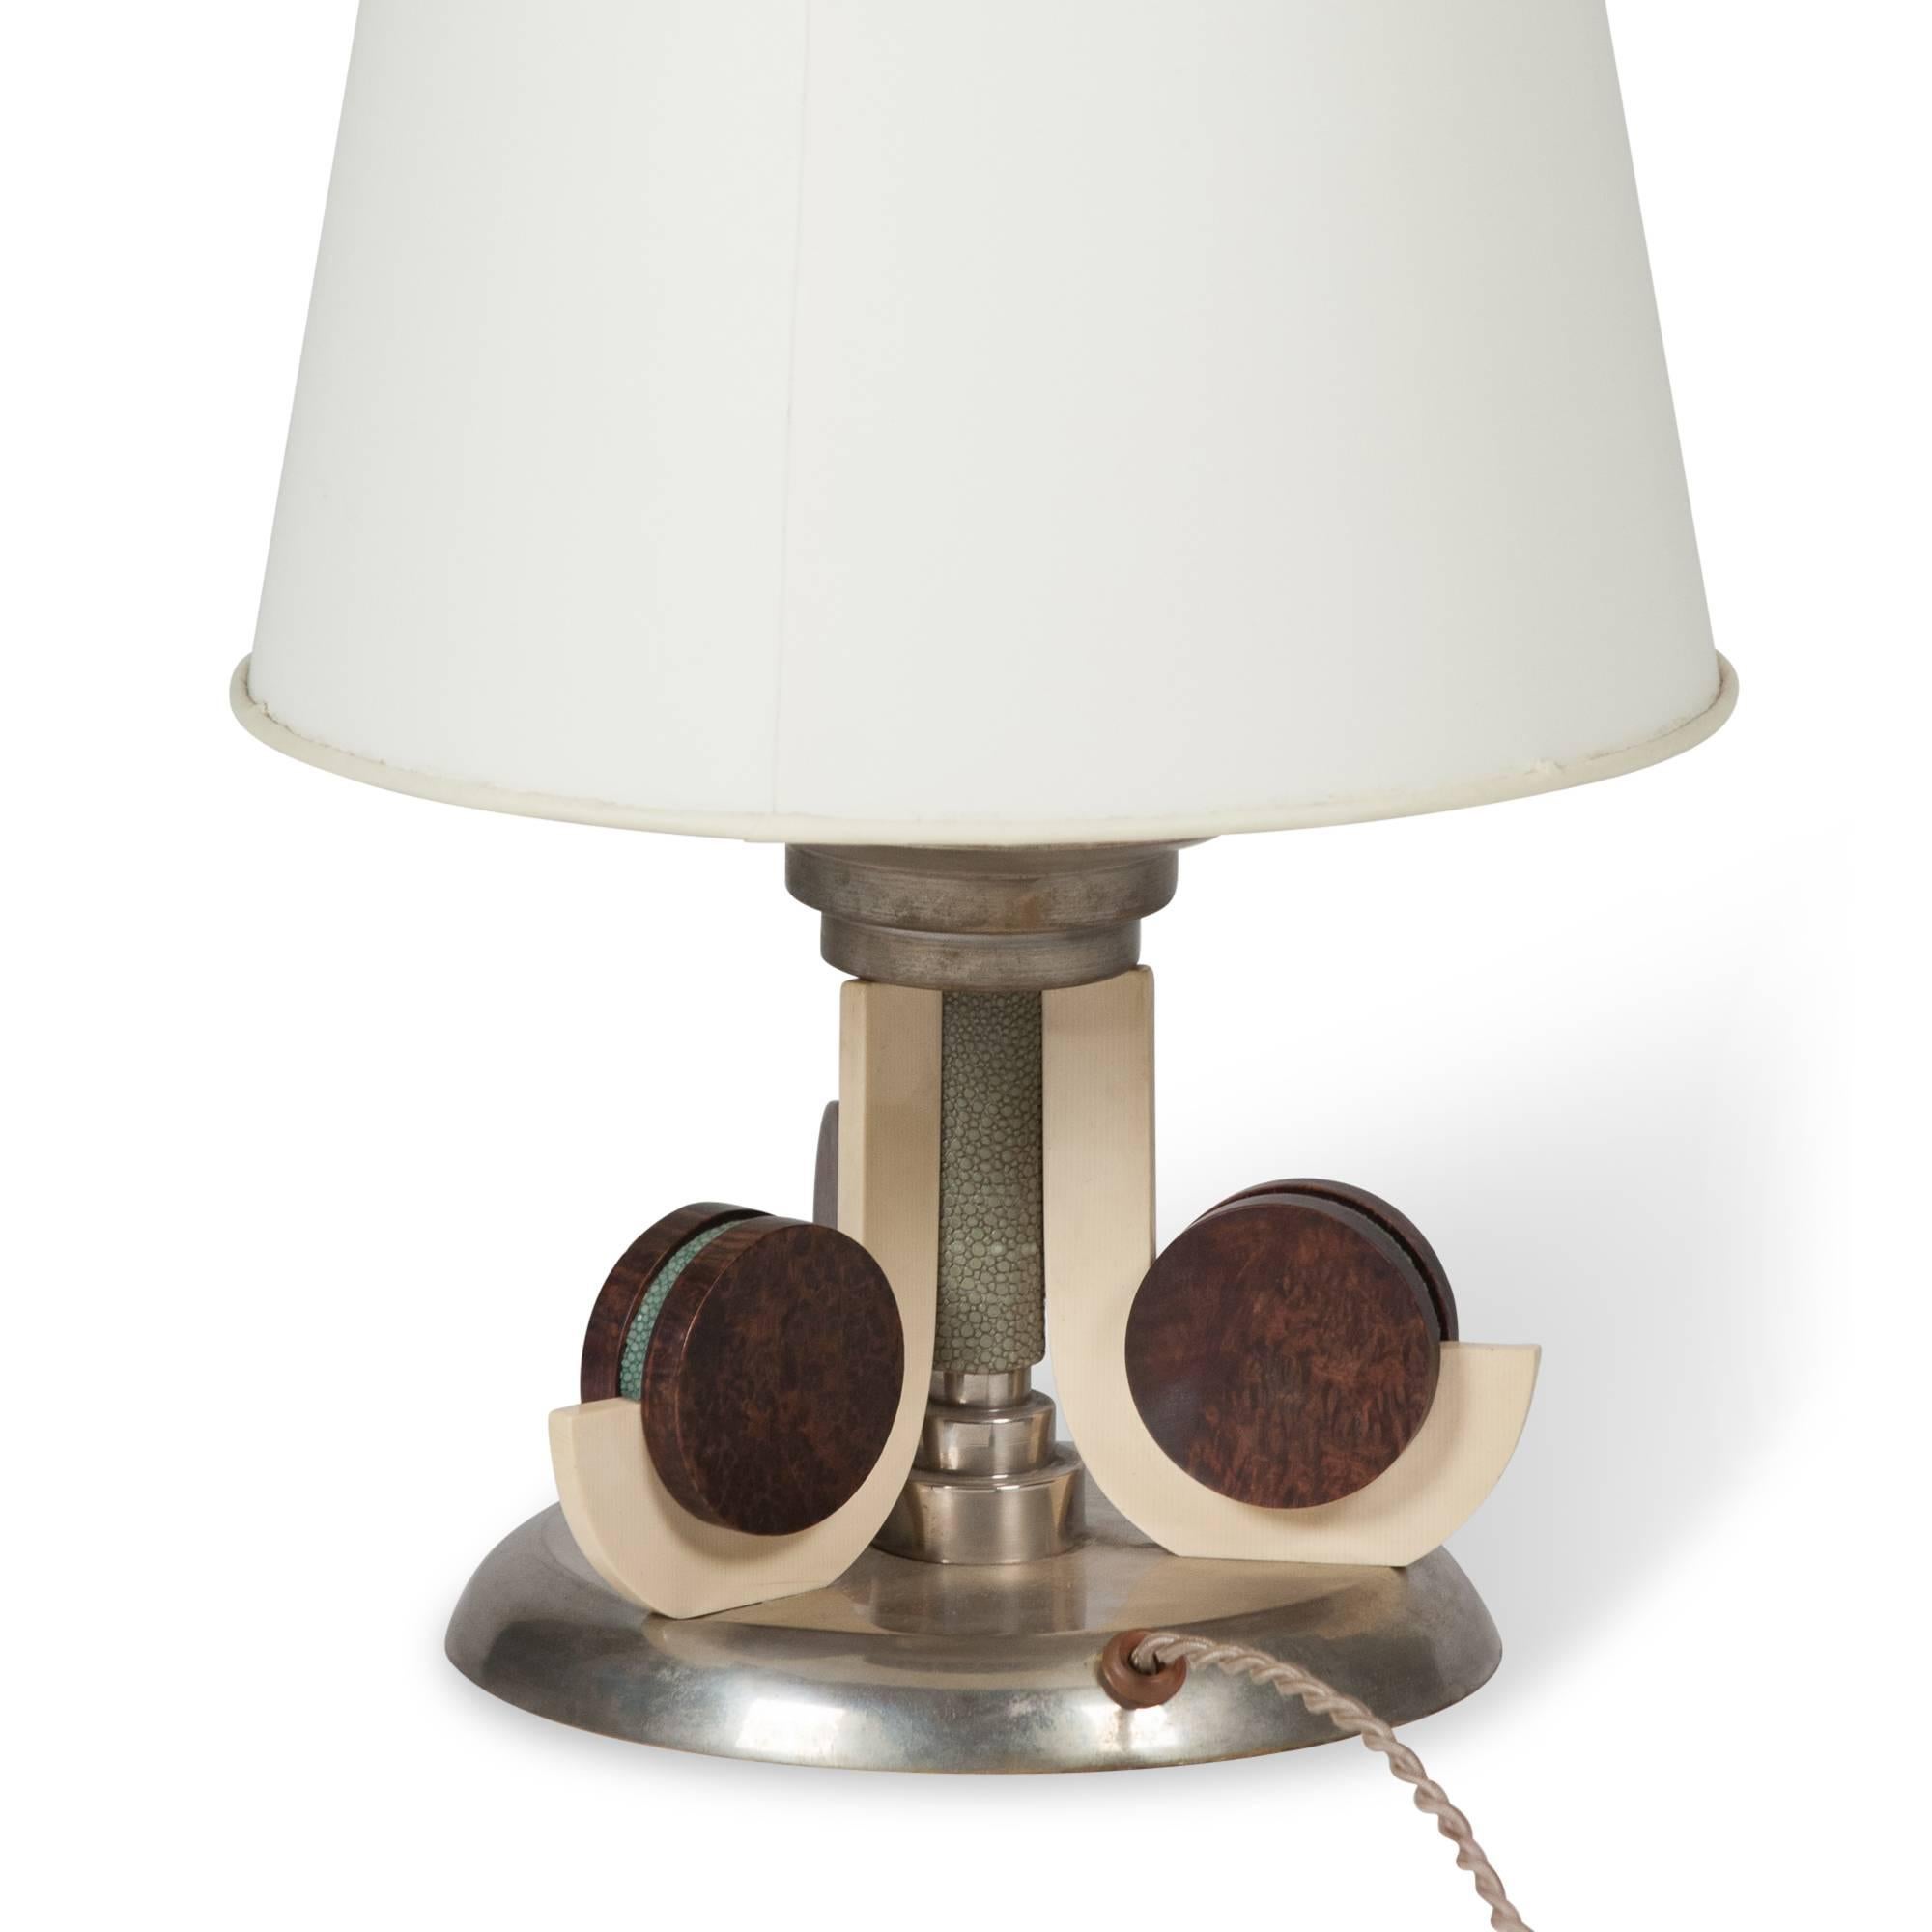 Galuchat (shagreen), nickel and Macassar table lamp, central column with three flanged elements, on a circular nickel base, R & Y Augousti, French, 1980s. Measures: Overall height 15 1/2 in, diameter of base 8 in, bottom diameter of shade 11 in.